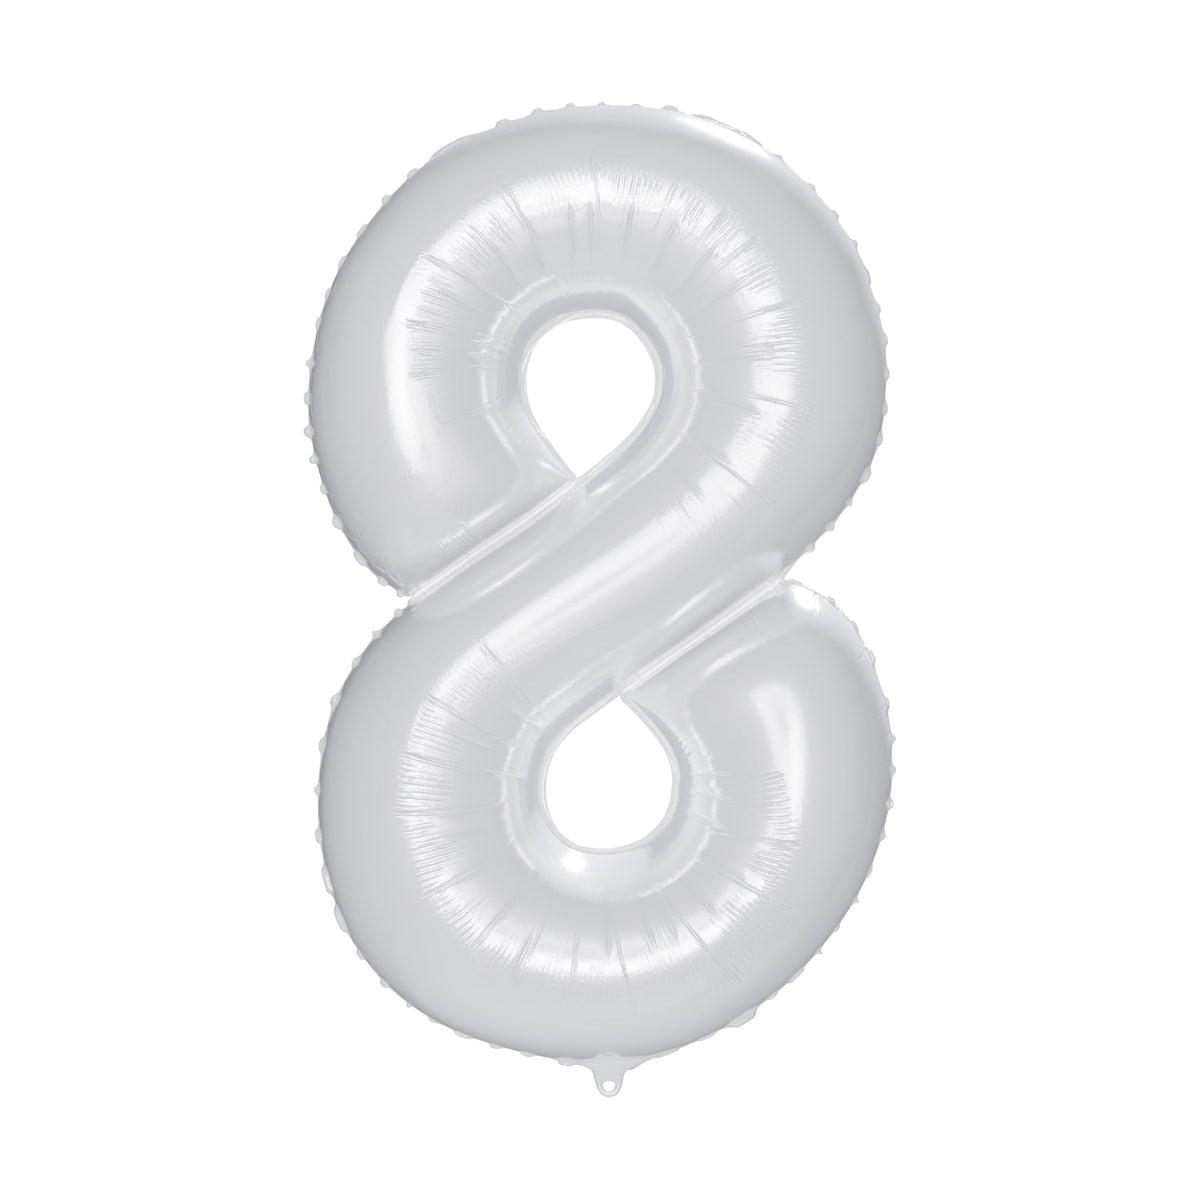 PARTYGRAM Balloons Frosty White Number 8 Foil Balloon, Matte Finish, 34 Inches, 1 Count 810077658222